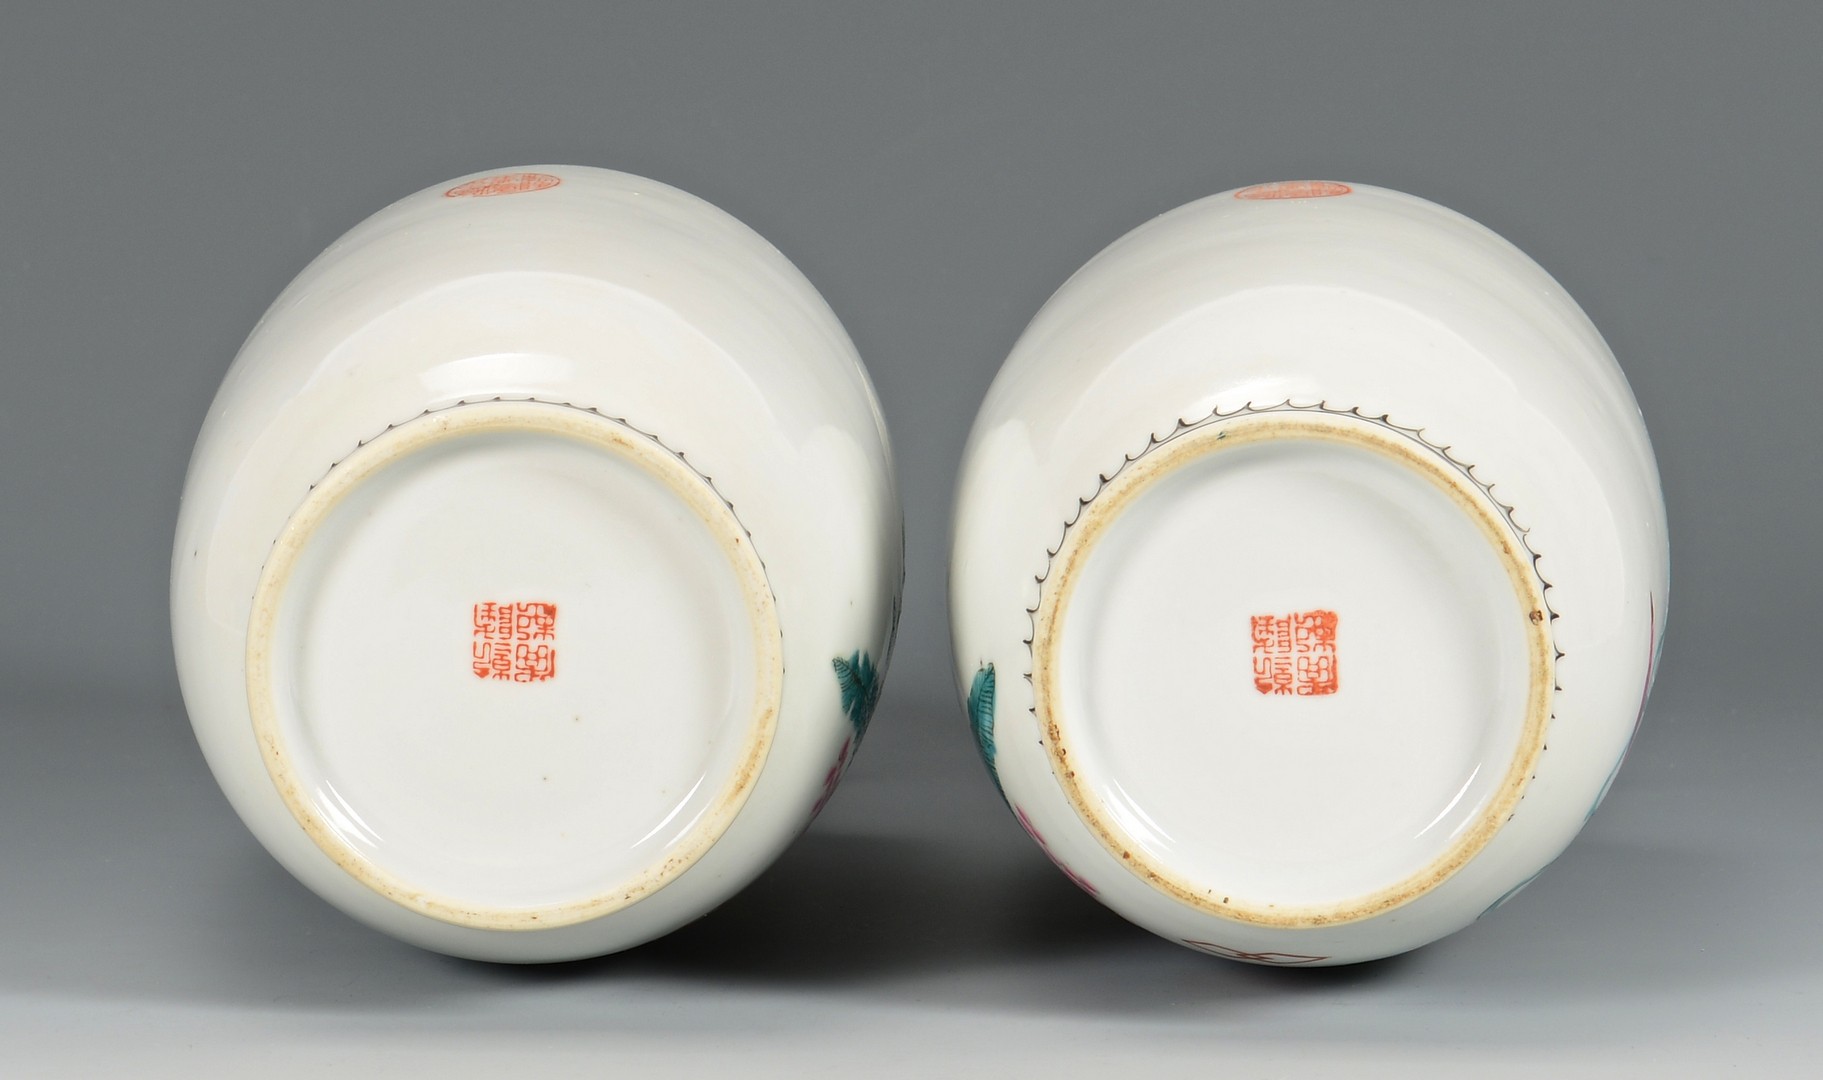 Lot 18: Chinese Republic Porcelains and Textiles